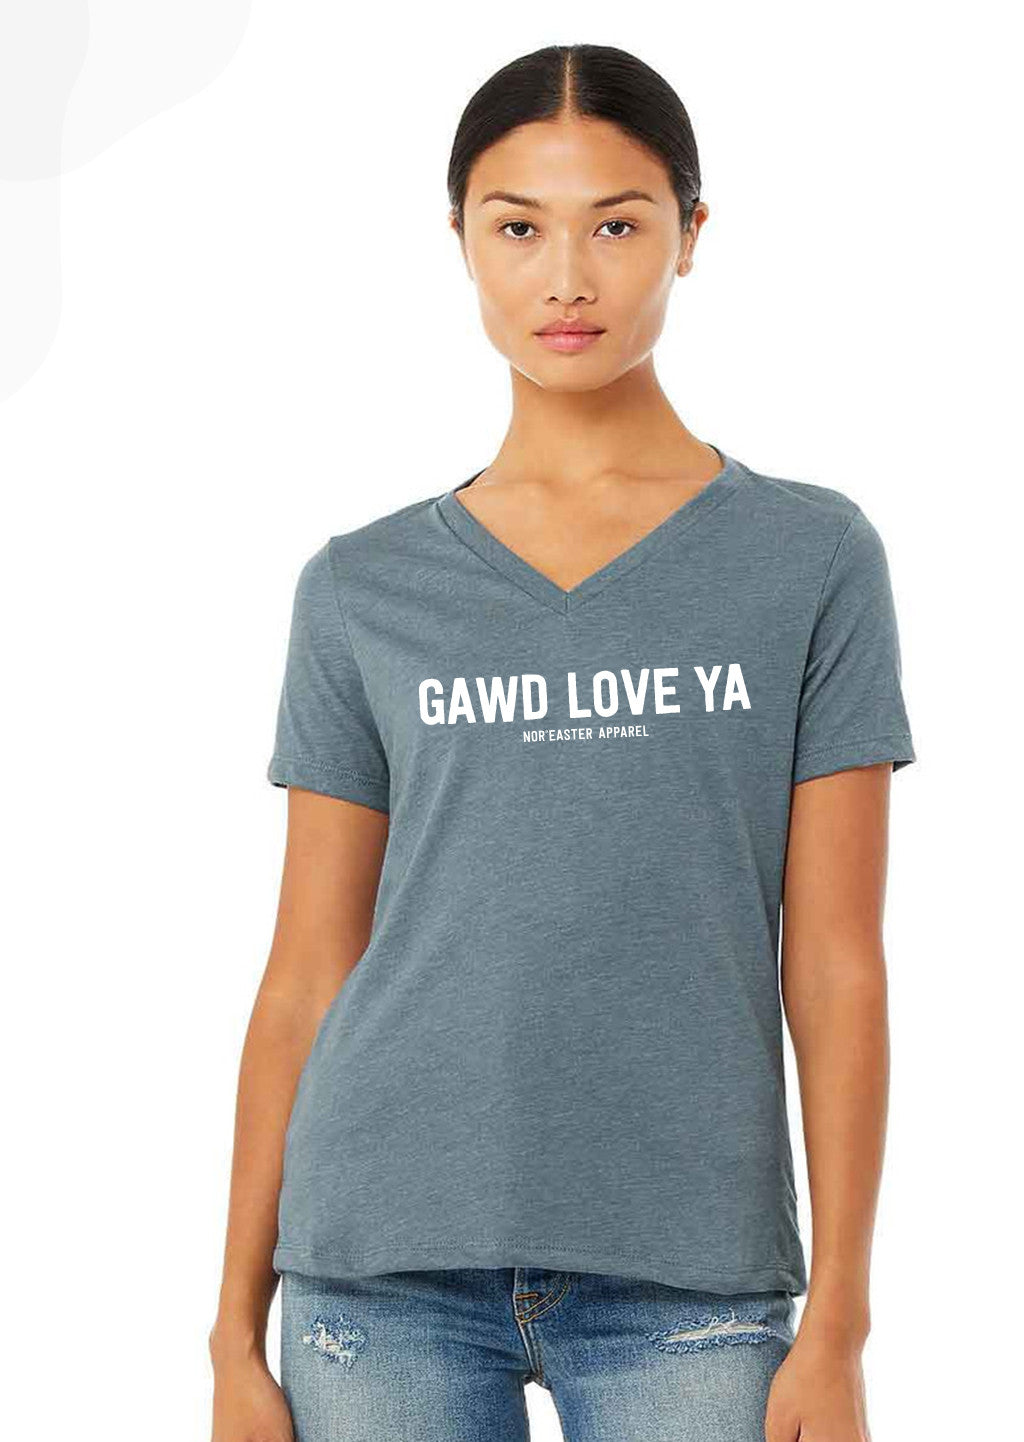 Women's Relaxed-fit Gawd Love Ya V-neck T-shirt